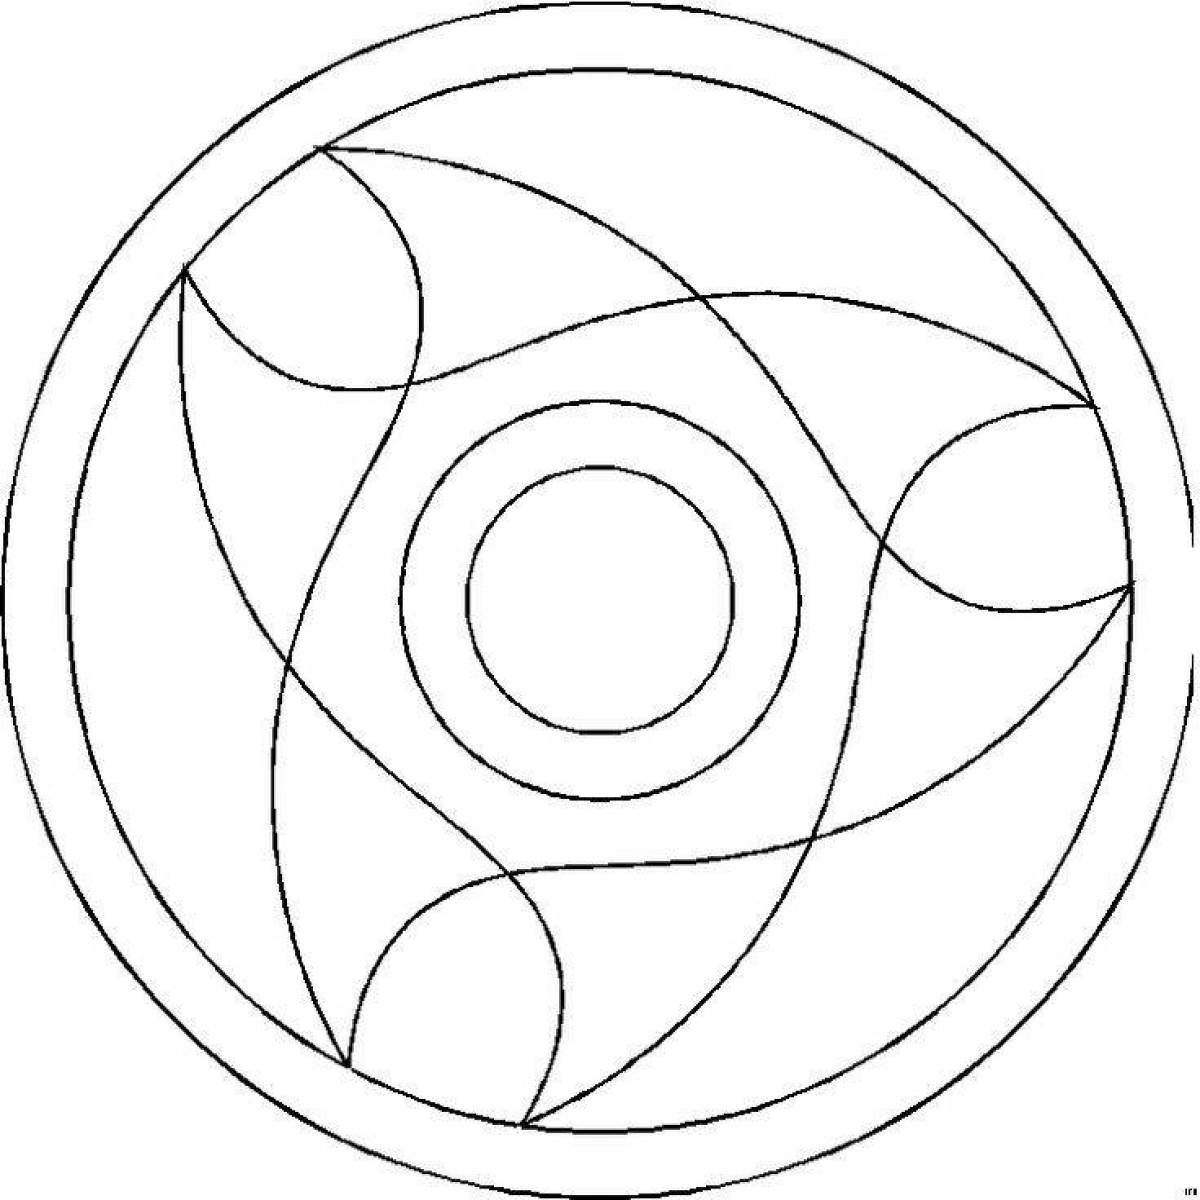 Swirl pattern coloring page